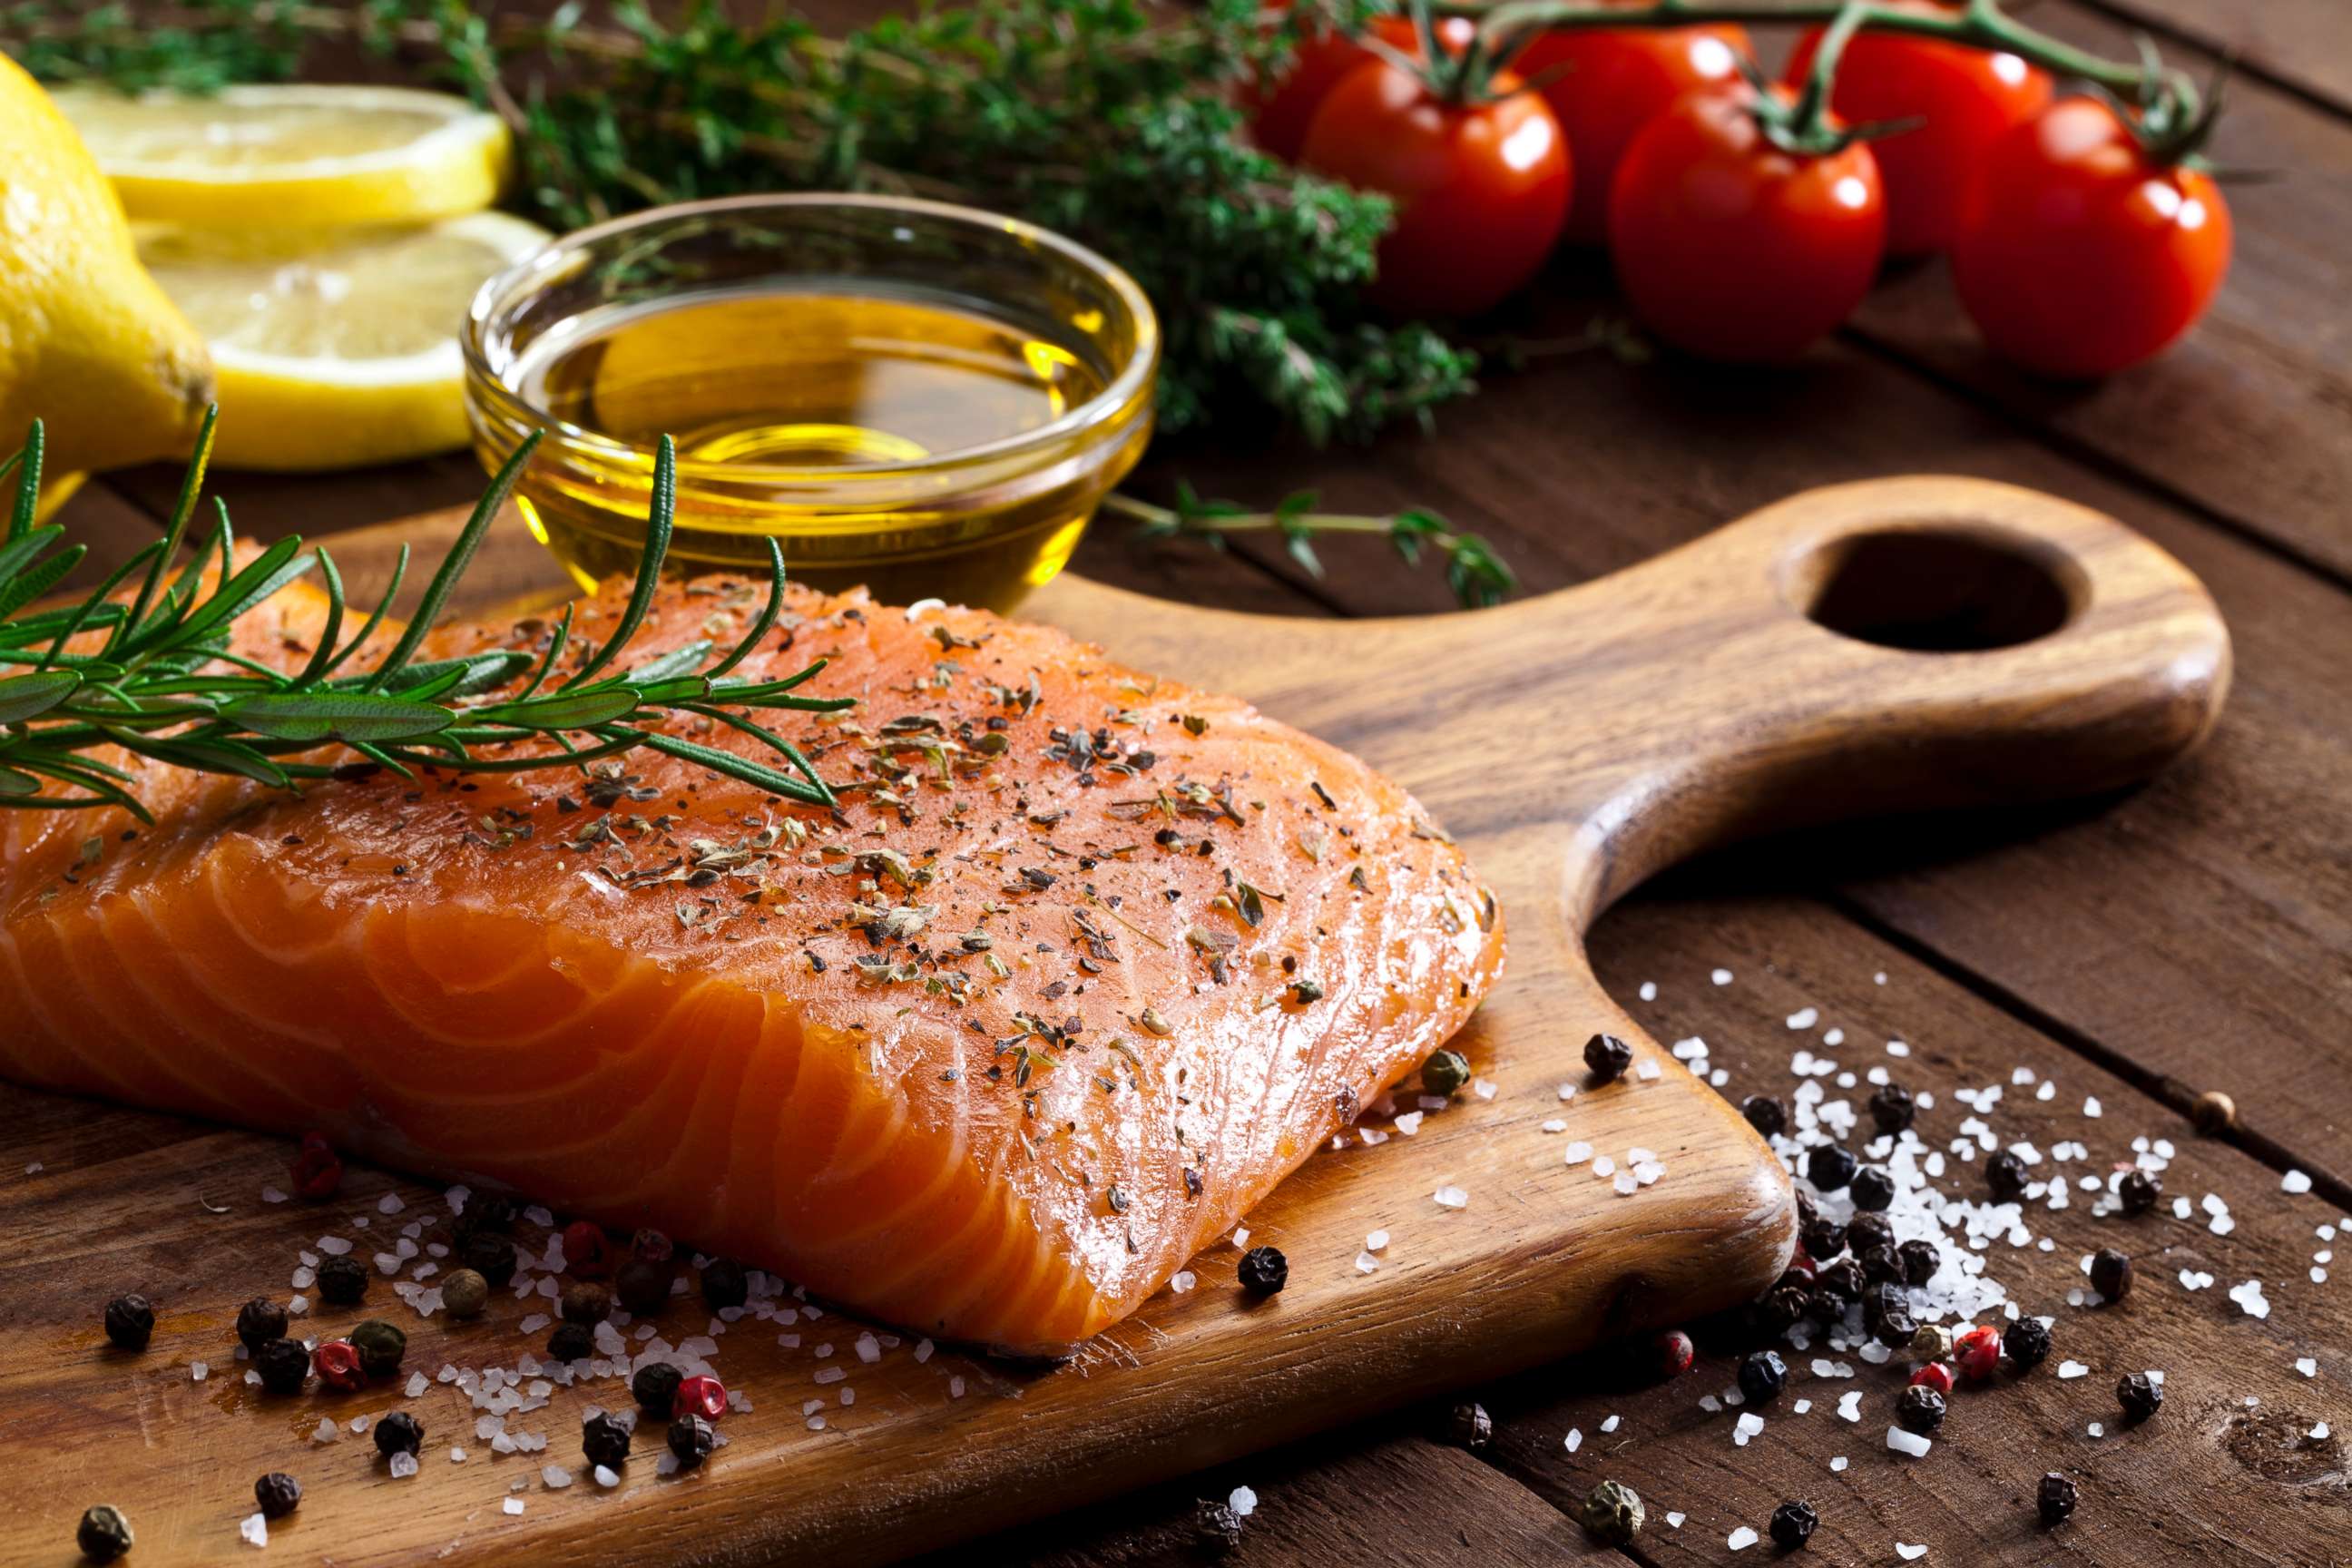 PHOTO: Seasoned salmon and olive oil are prepared in this stock photo.